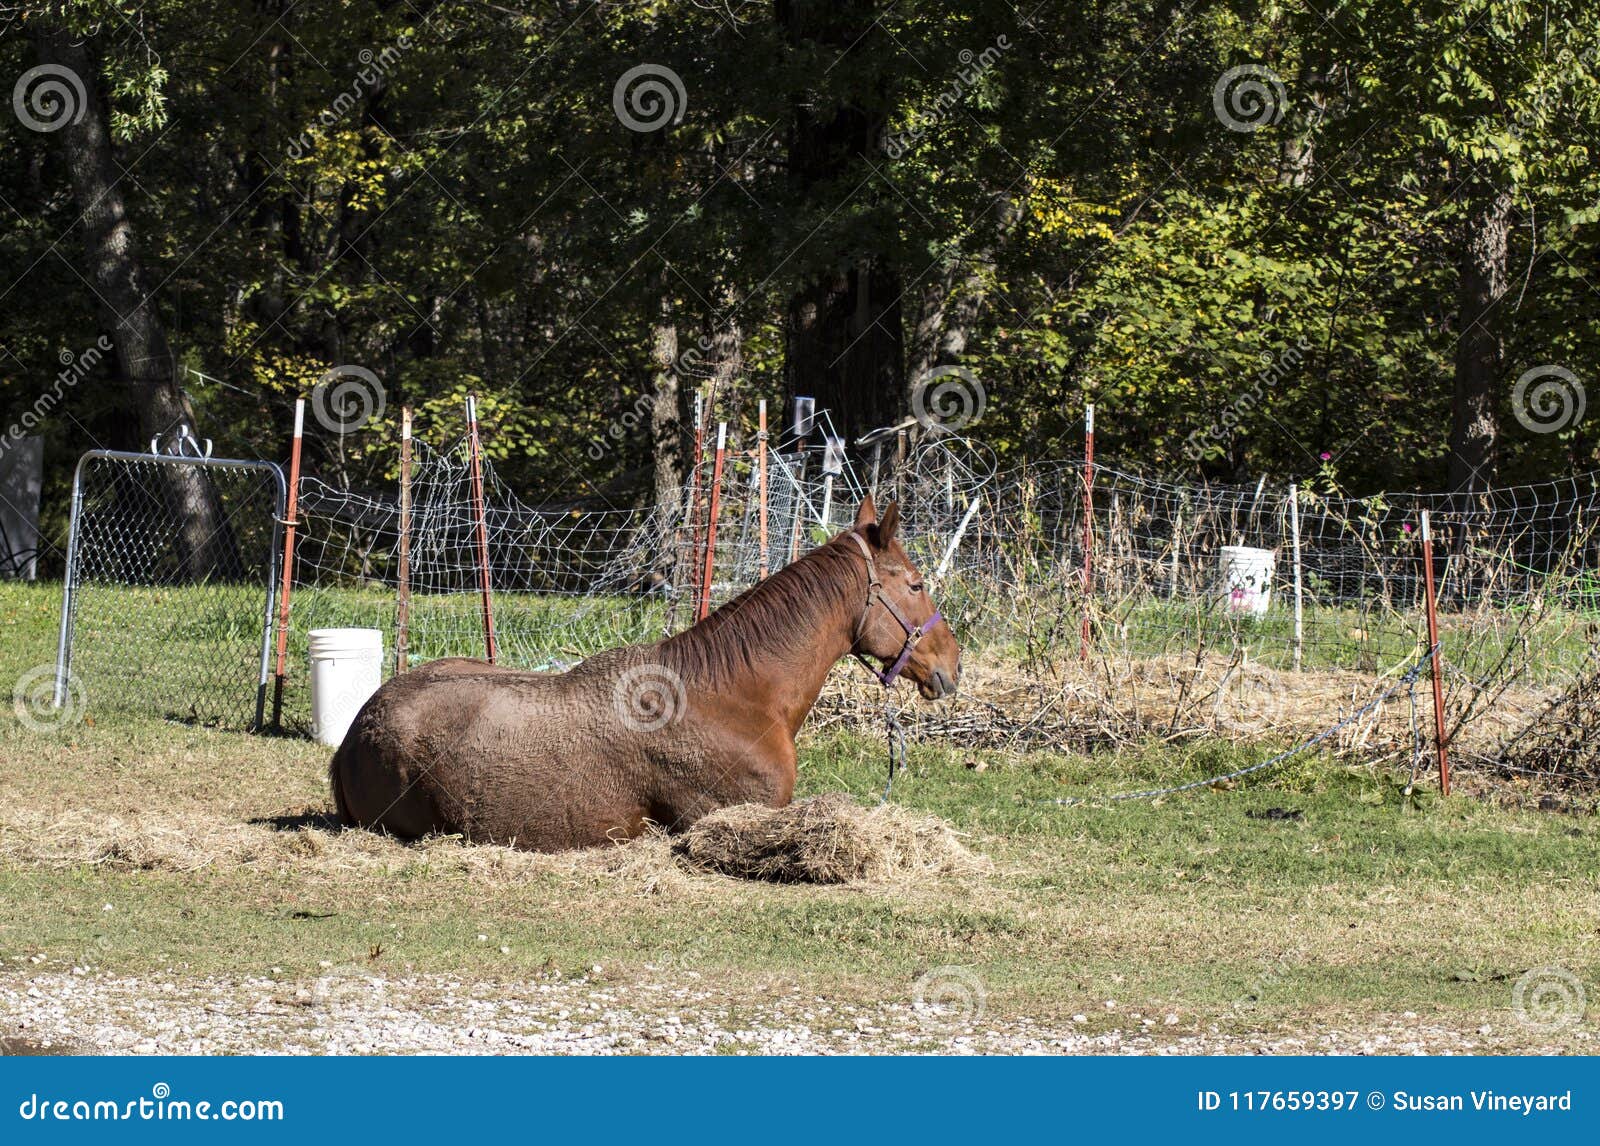 red horse that has been rolling in the mud lying besides hay and an old wire fence in front of trees